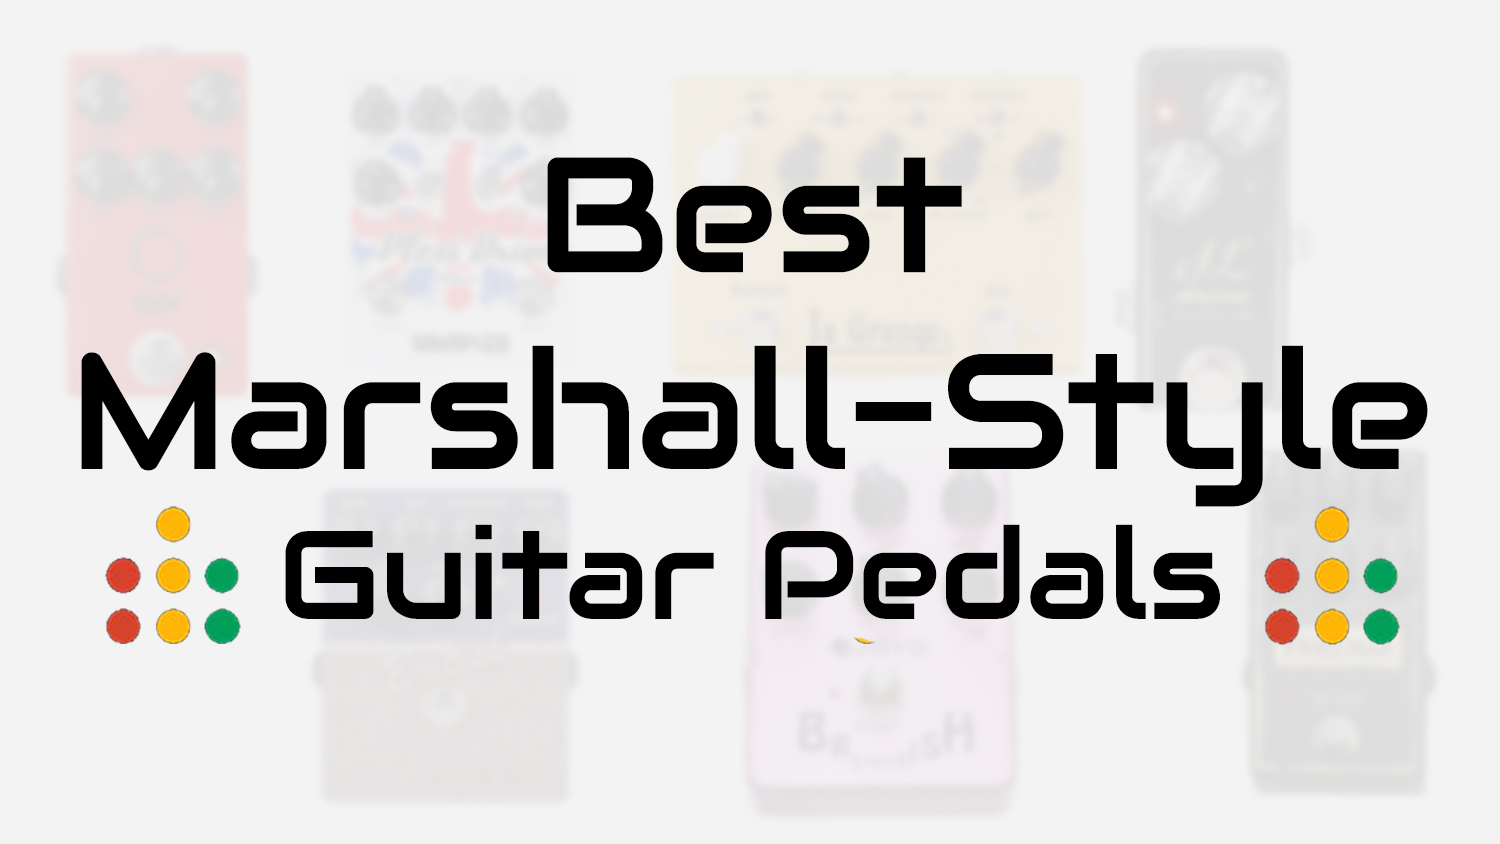 best marshall style guitar pedals